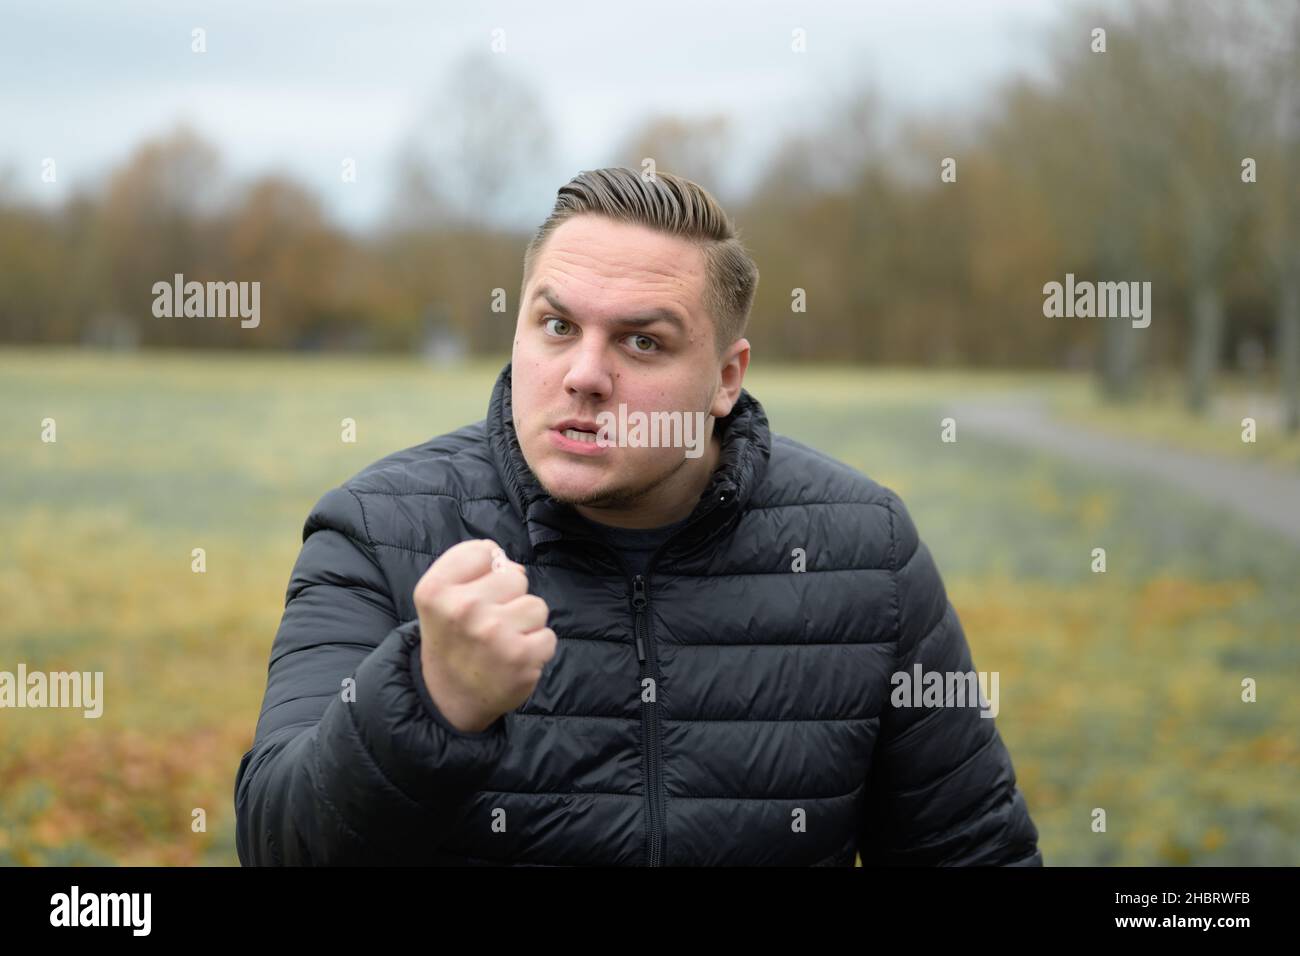 Angry young man menacing the camera with his fist as he scowls with a baleful glare outdoors in an autumn park Stock Photo